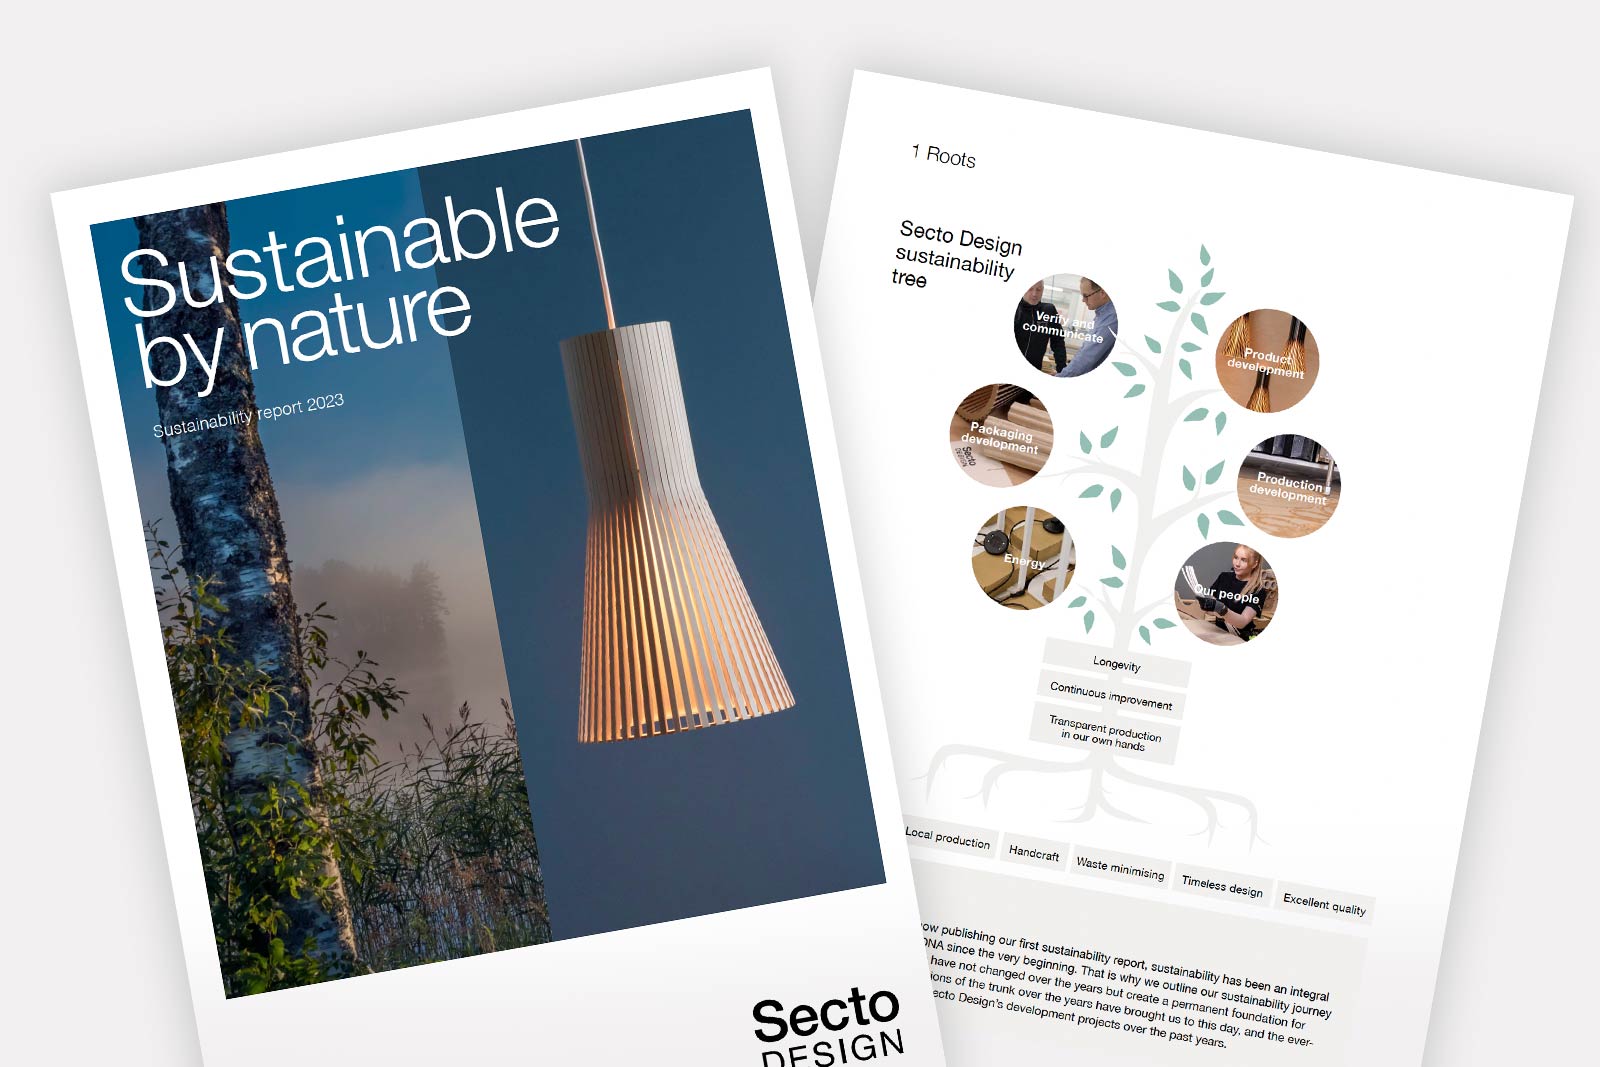 The front cover of the Sustainability report.